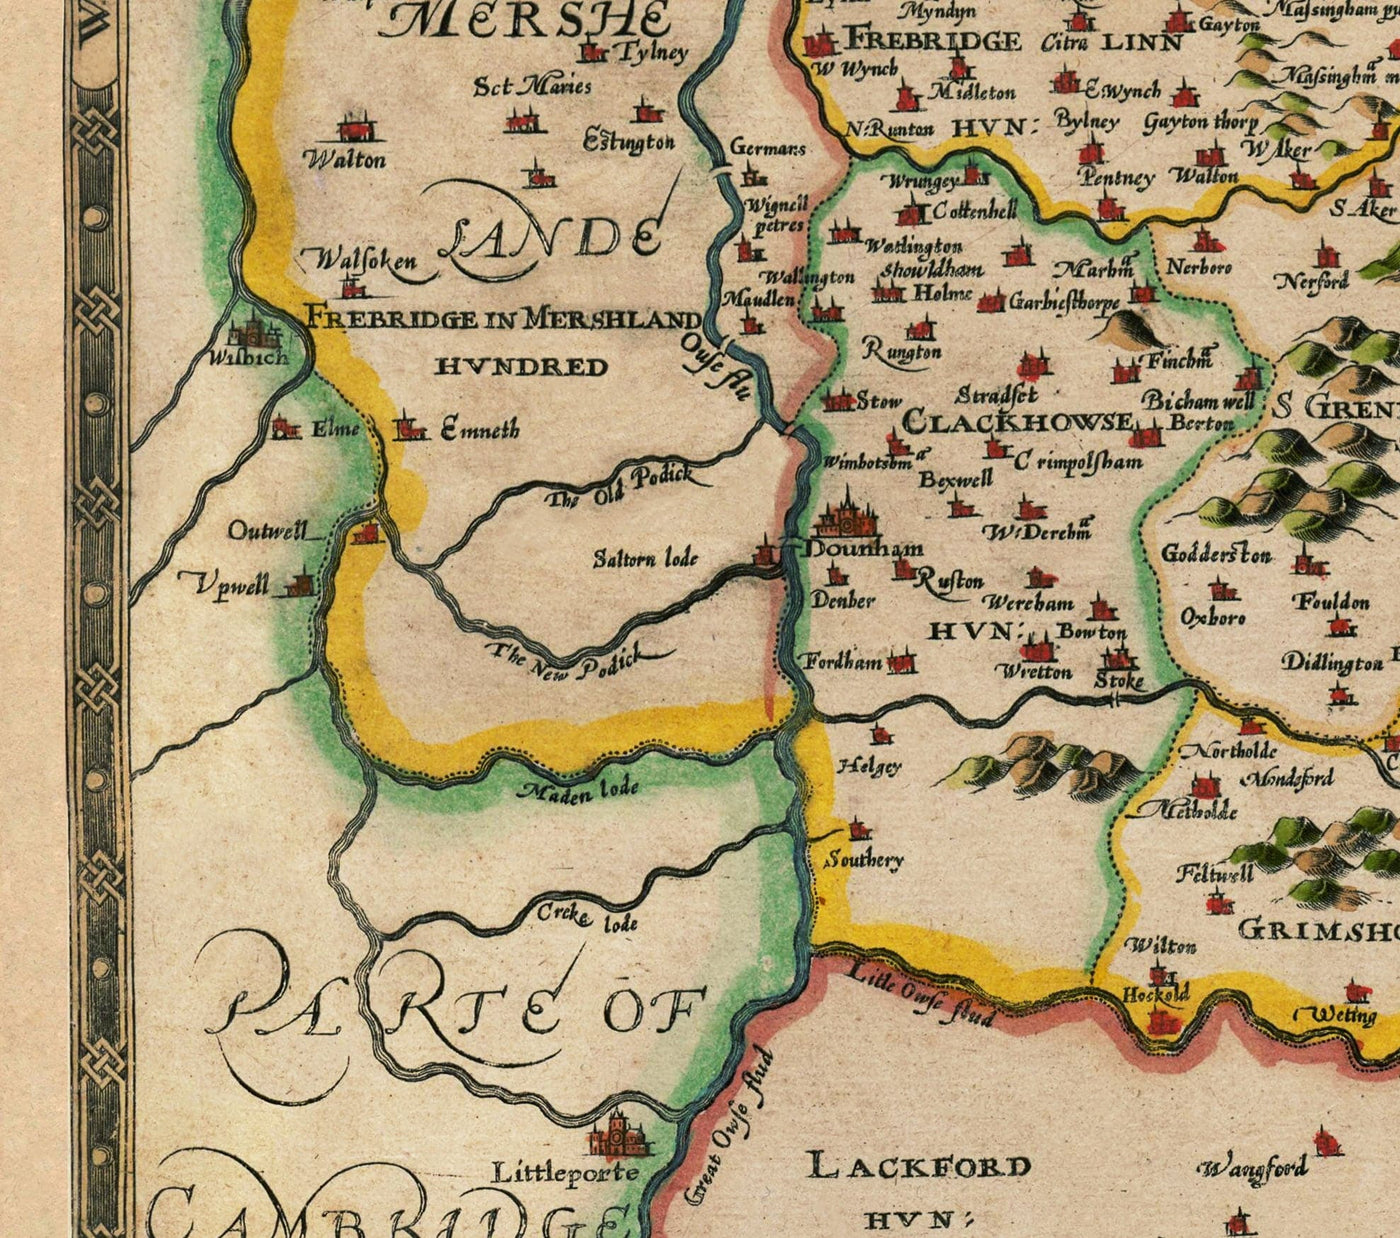 Old Map of Norfolk, 1611 by John Speed - Norwich, Great Yarmouth, King's Lynn, Thetford